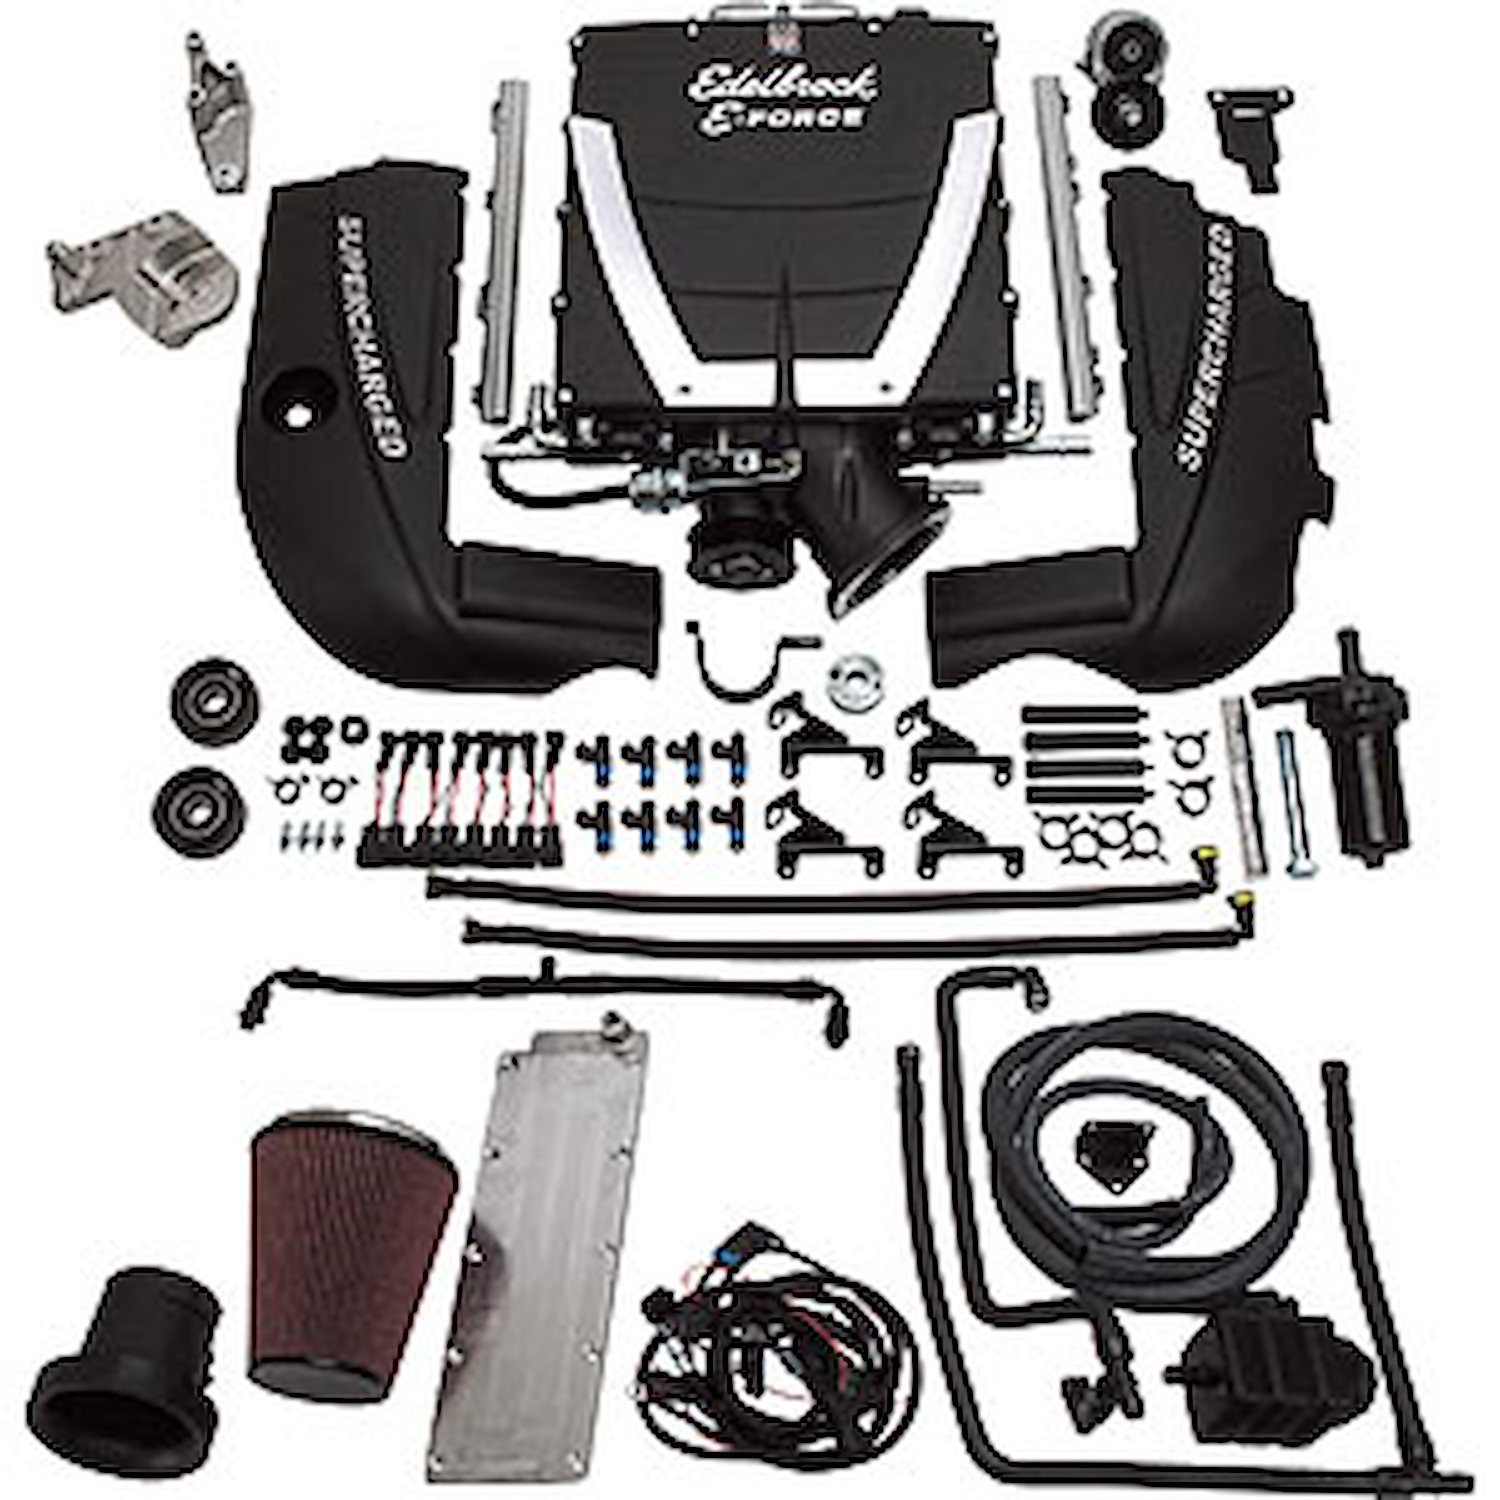 E-Force Universal Supercharger Kit for GM Gen III LS1 Engine with Camaro/GTO Accessory Drives